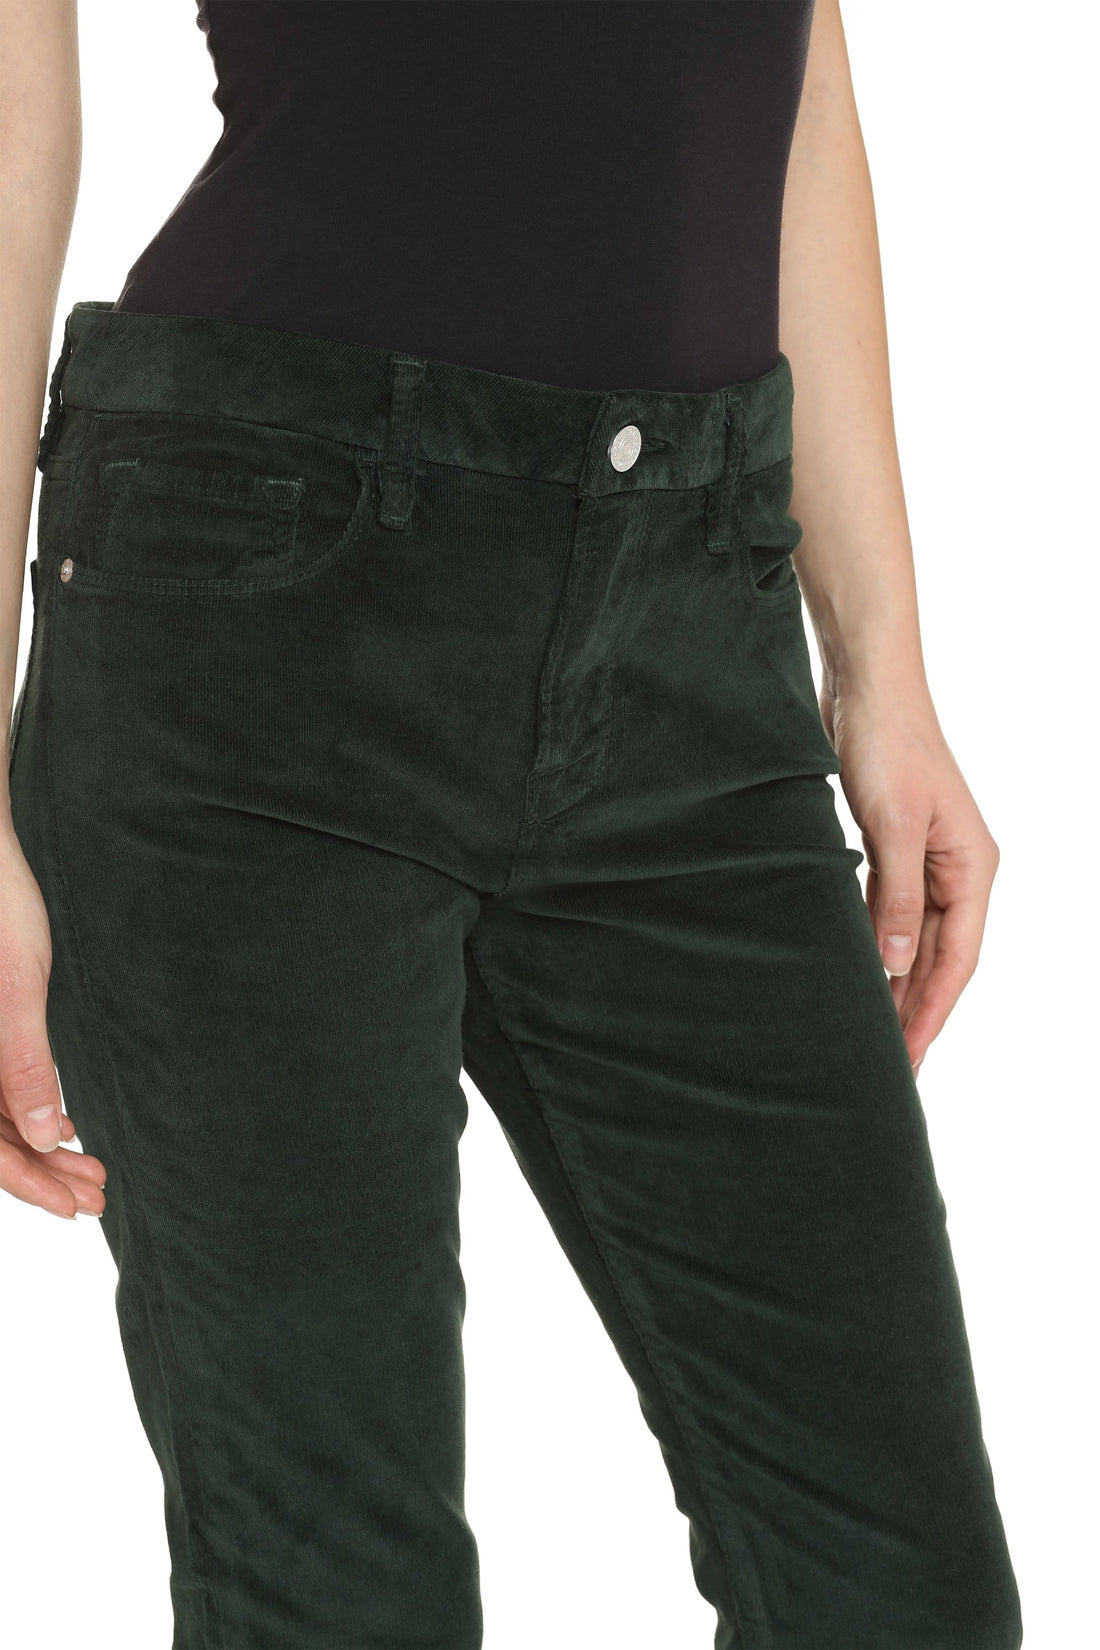 Frame-OUTLET-SALE-Le Mini Boot flared trousers-ARCHIVIST